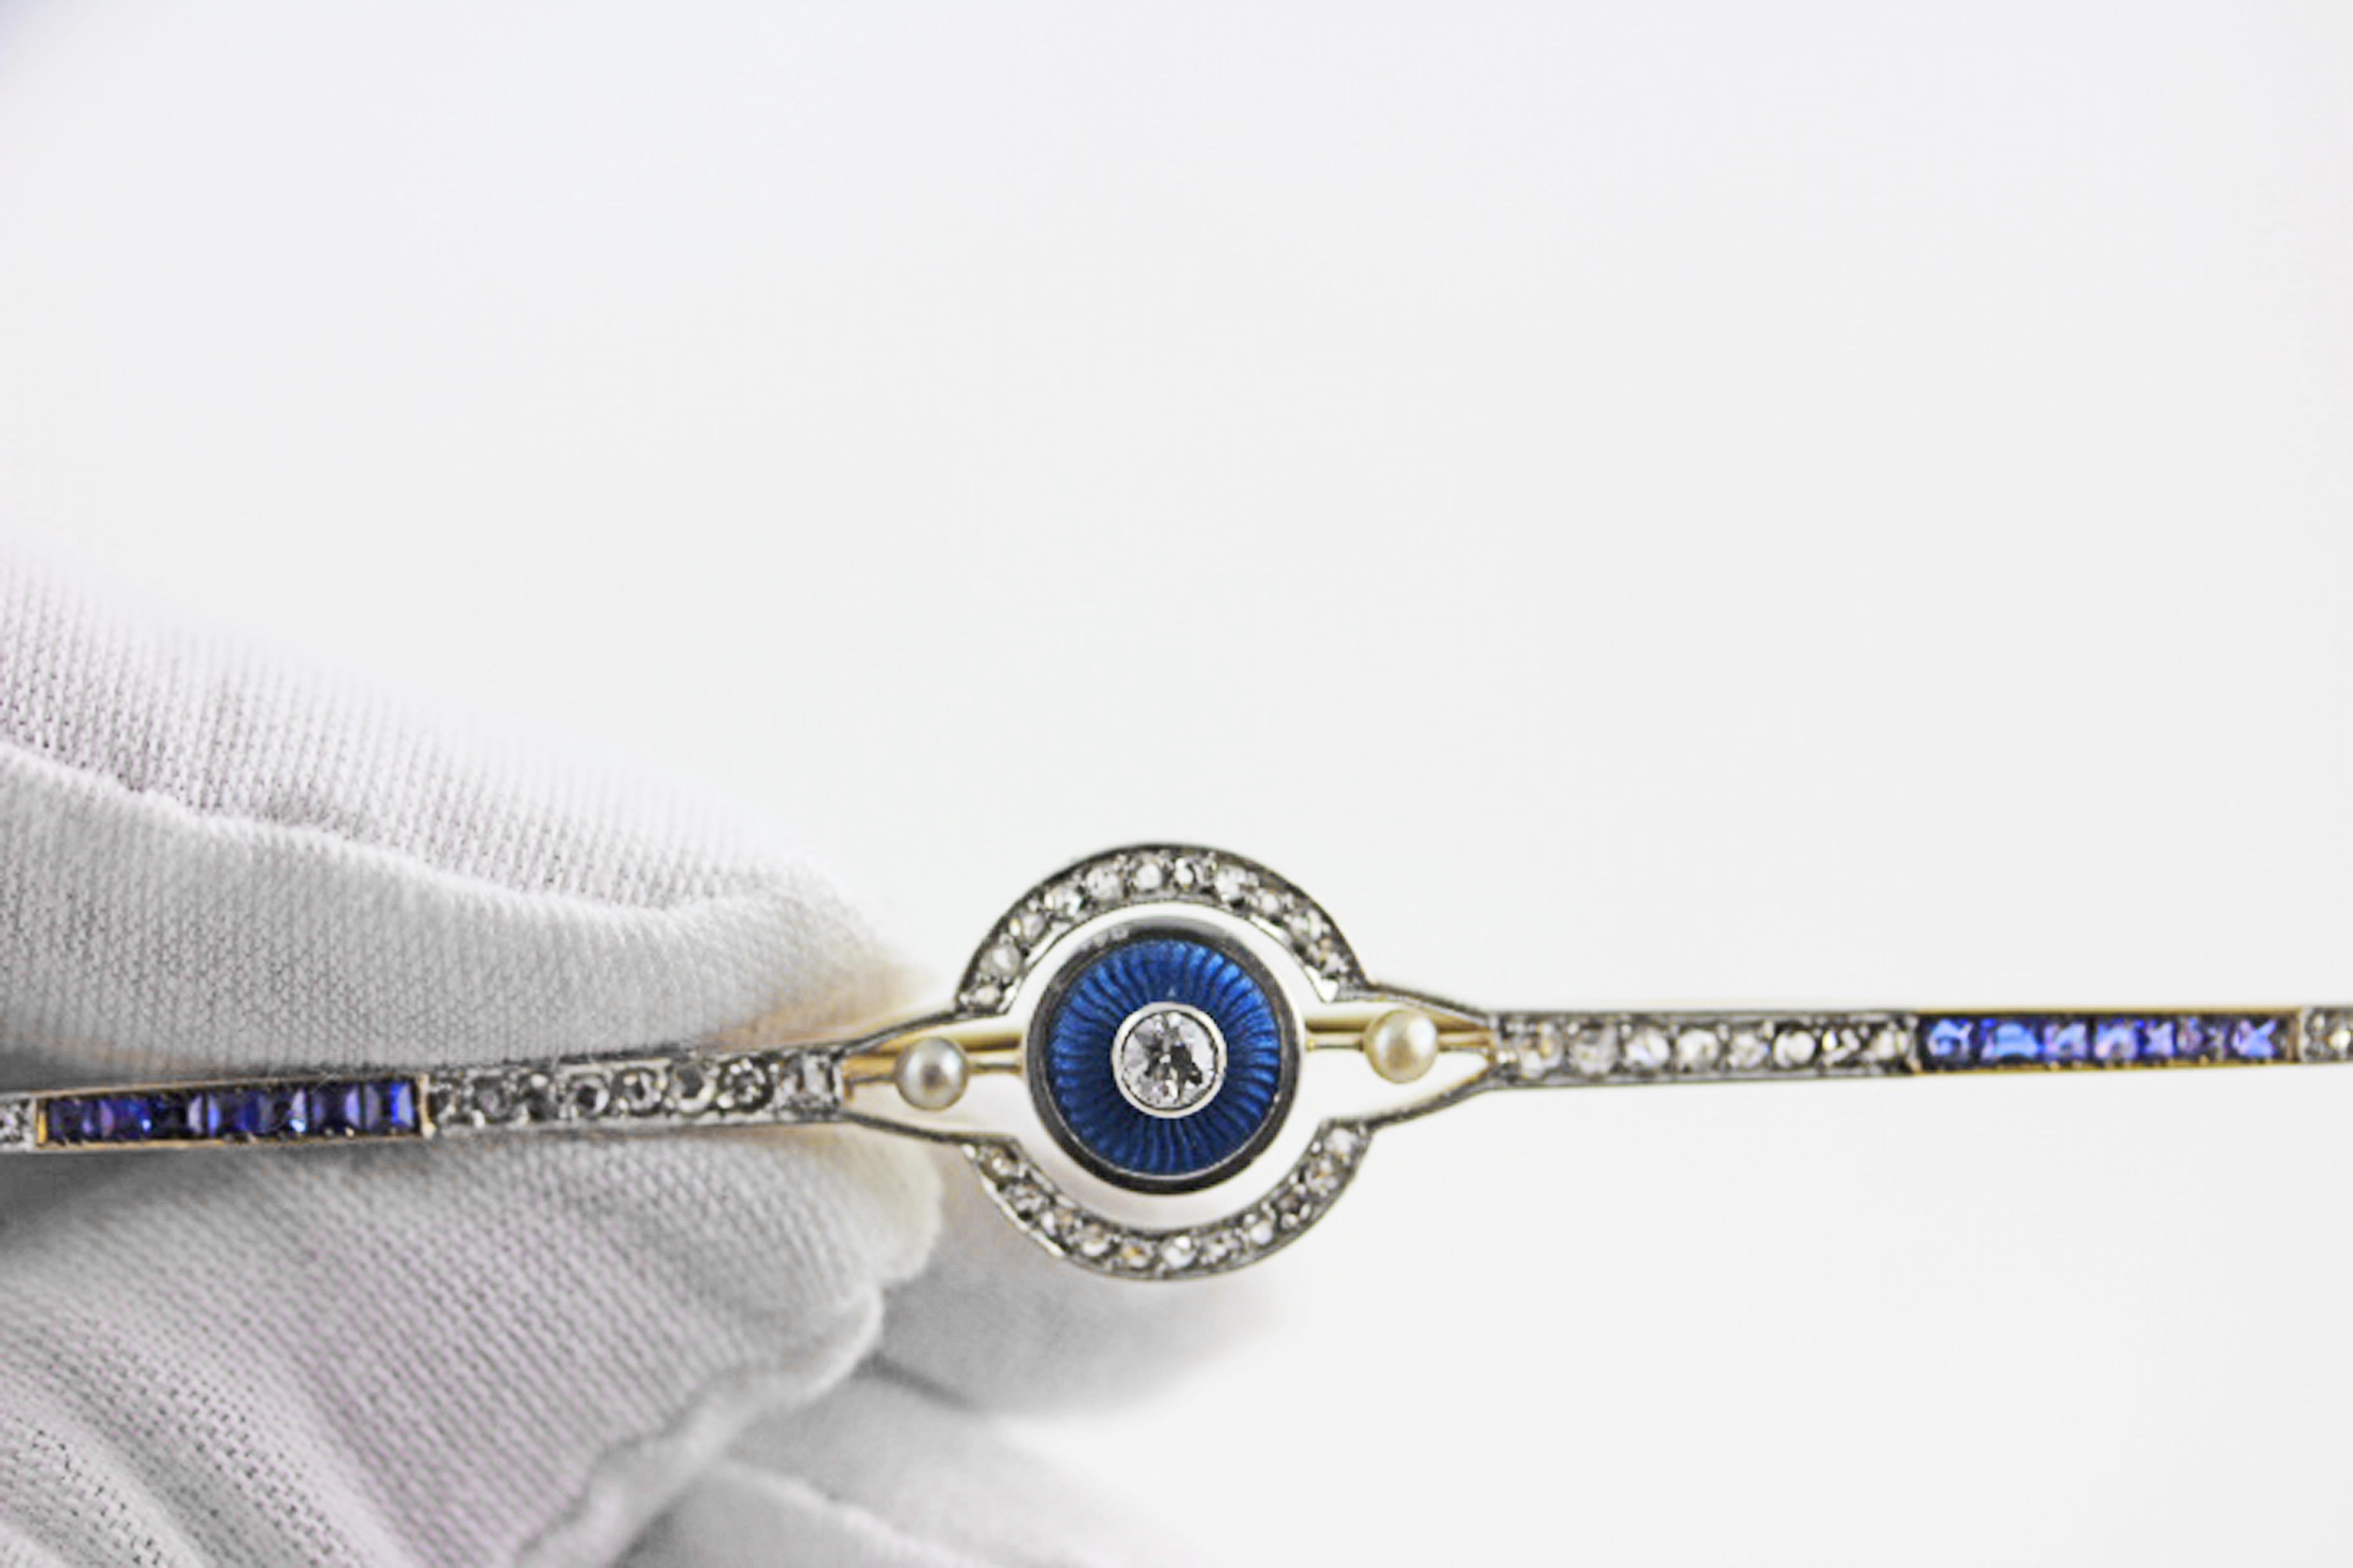 This stunning and very particular original Art Deco bar pin is made in 14 karat yellow gold, the elegant geometric design is composed of sparkling diamonds interspersed with vivid blue sapphires and embellished by pearls.
This bar brooch provides a